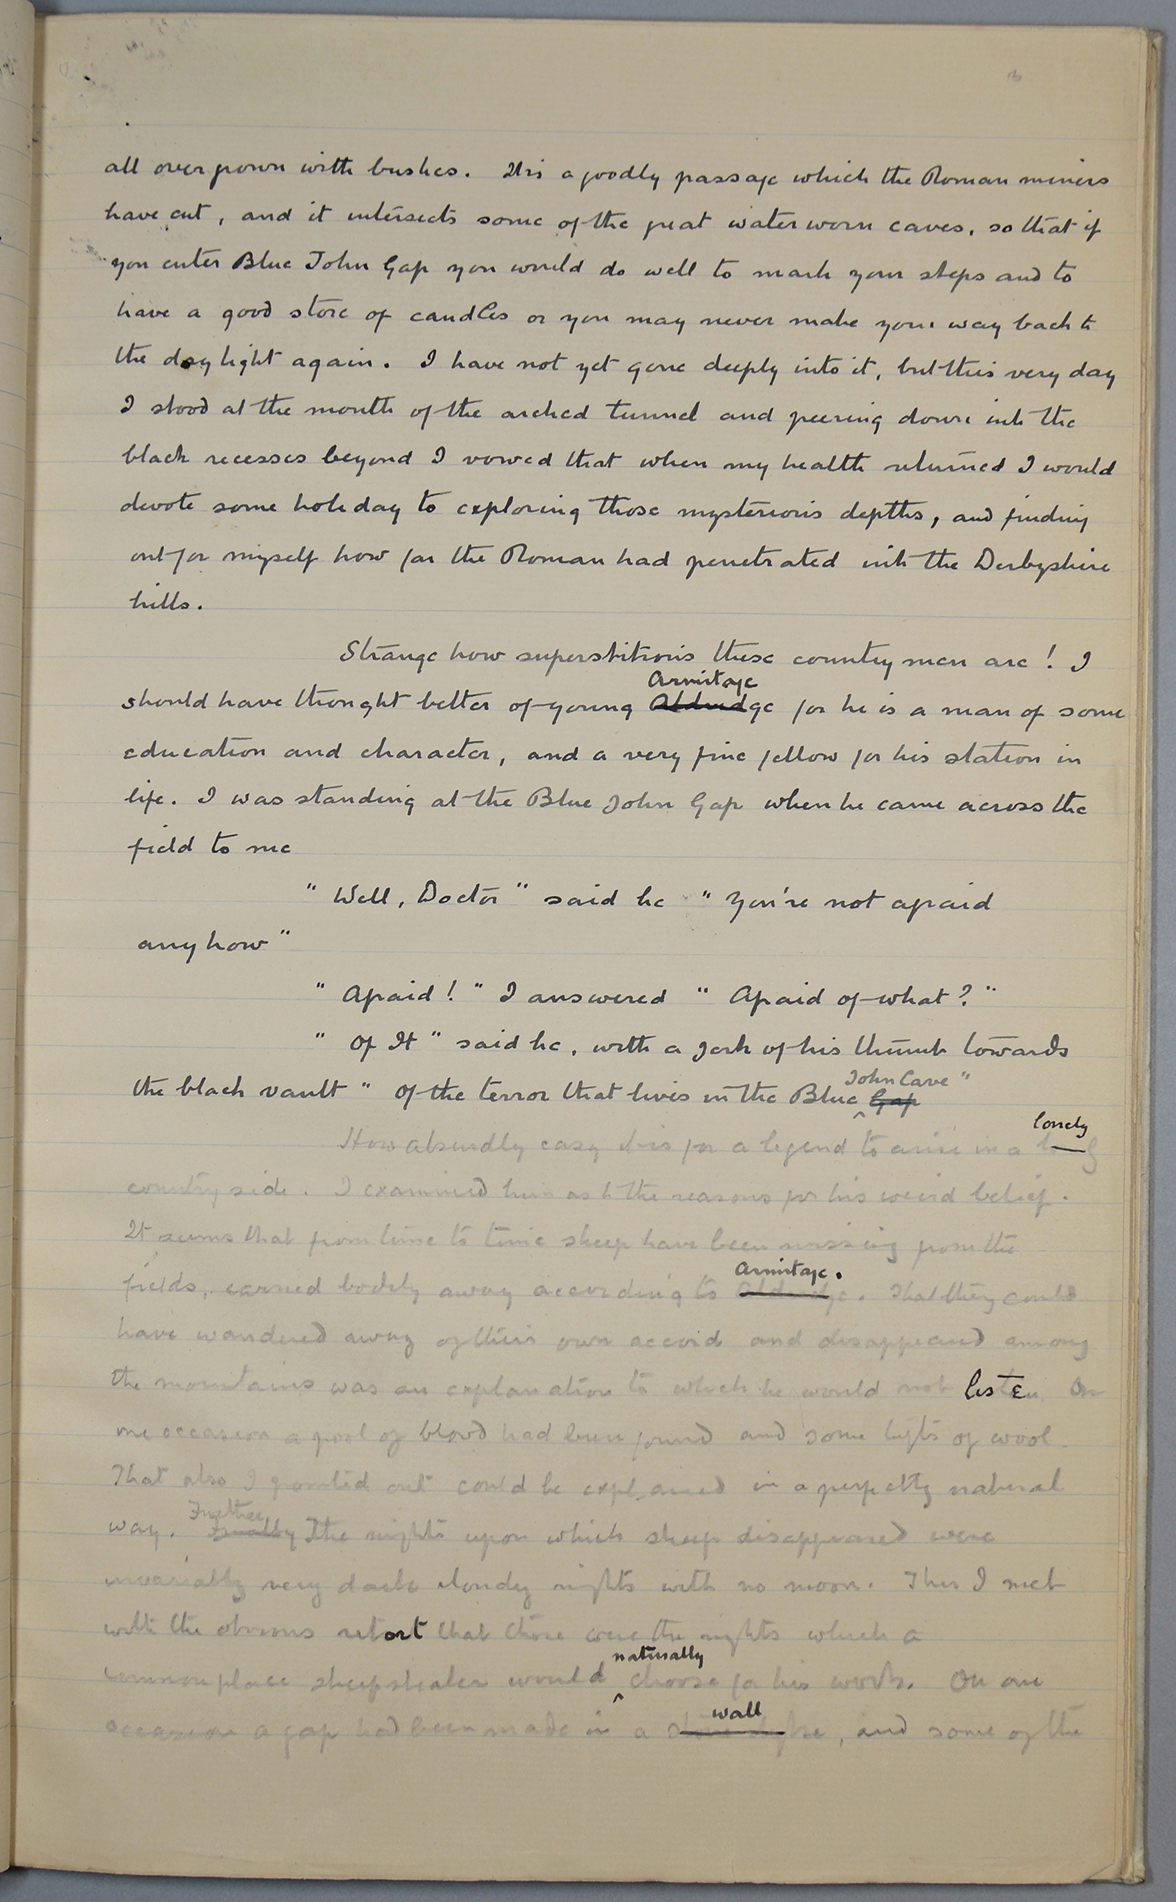 page 3 of the manuscript of "The Terror of Blue John Gap"